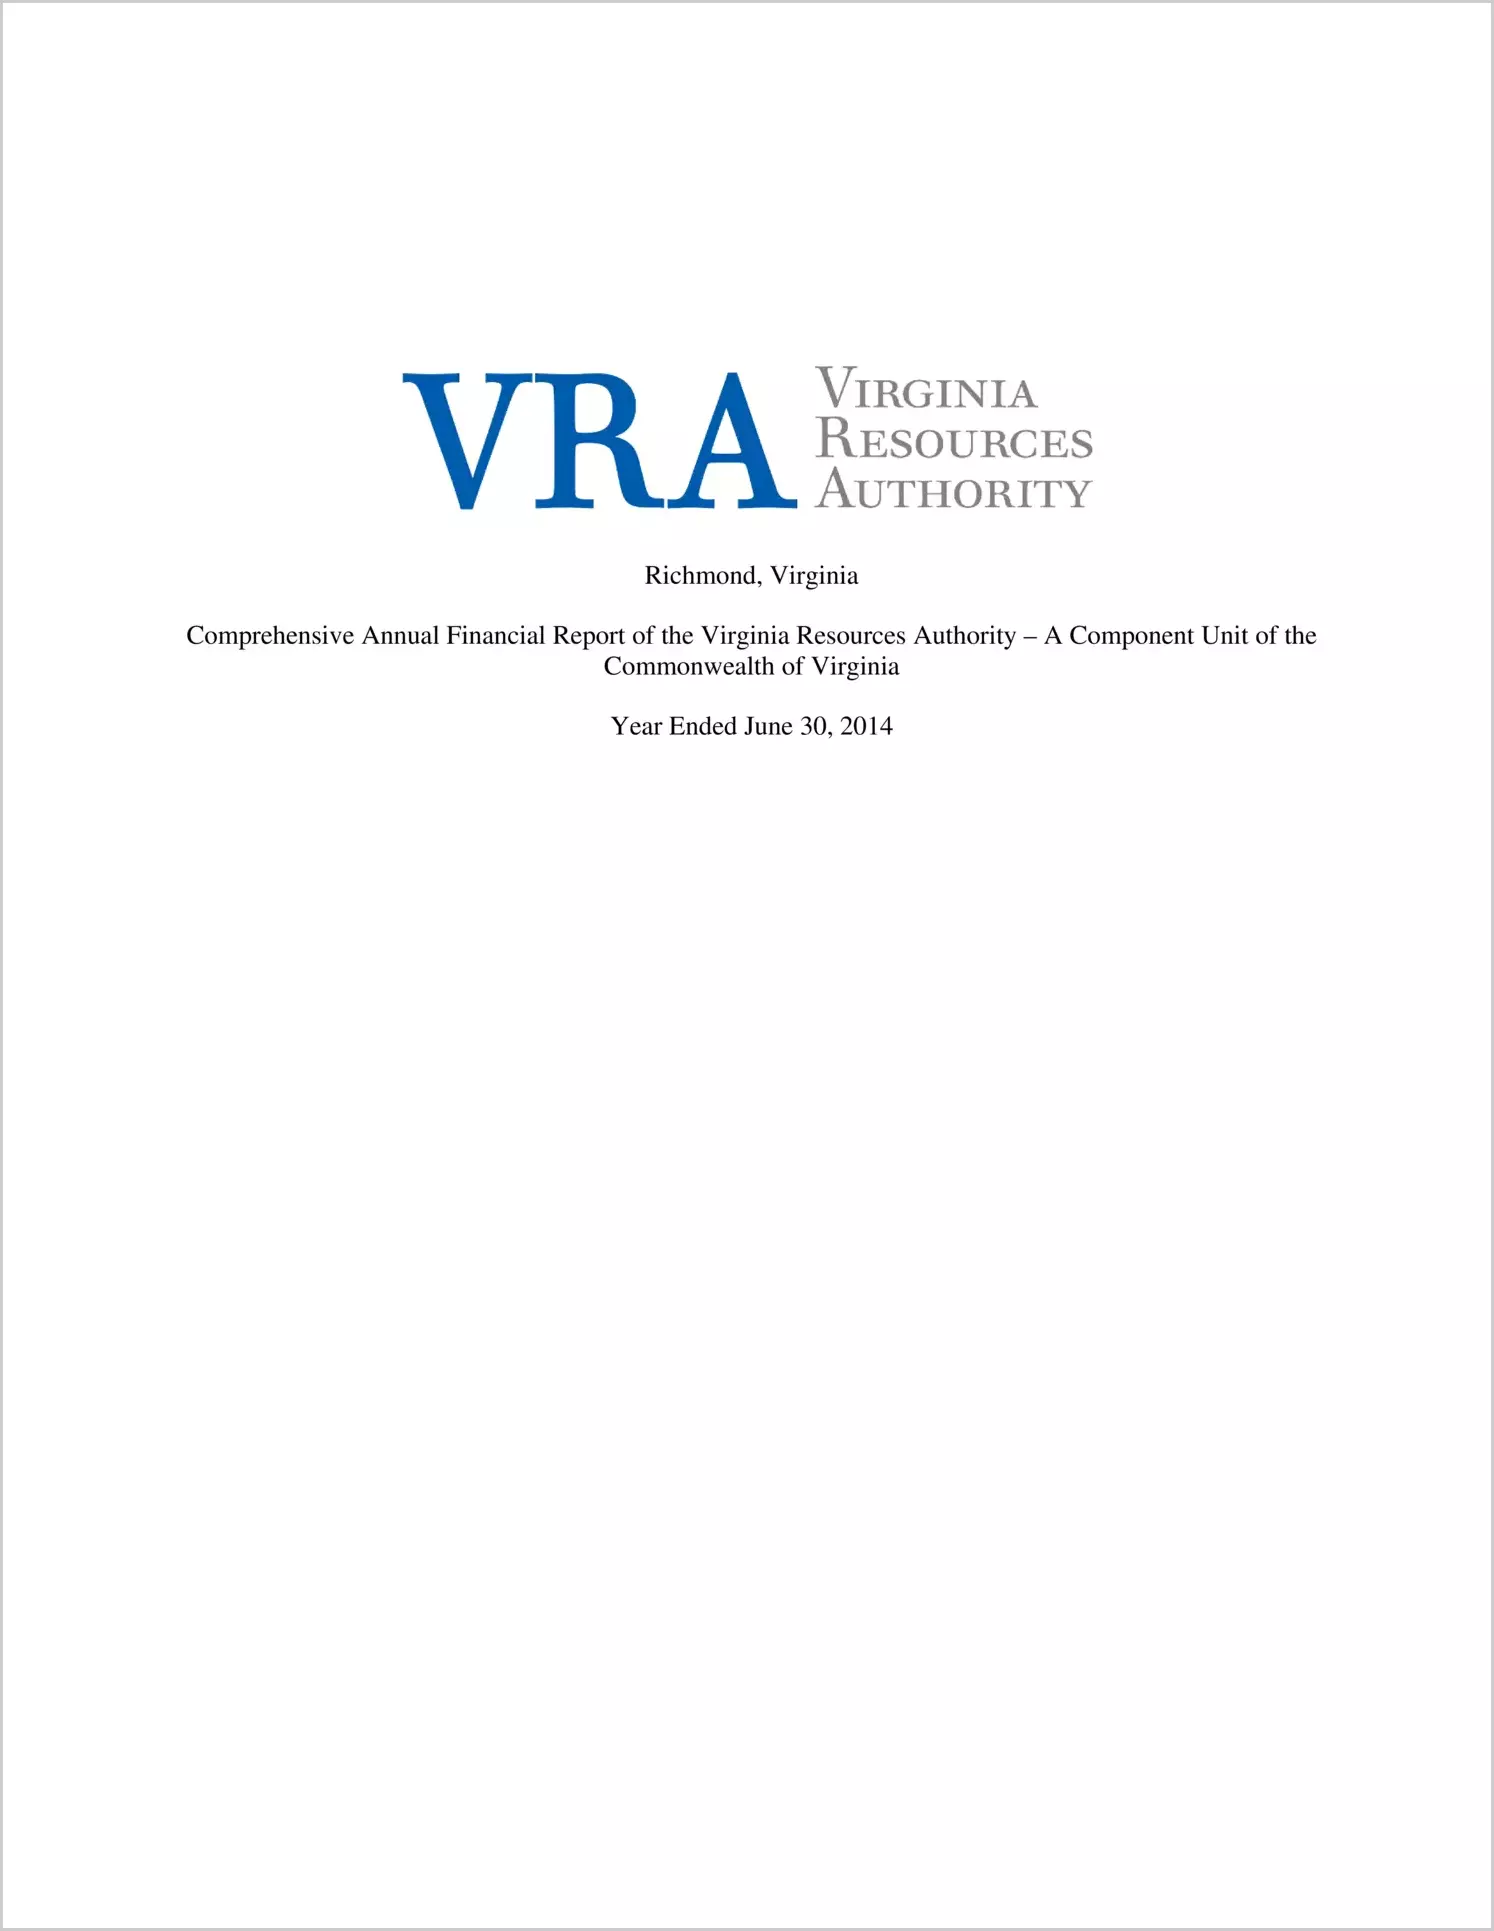 Virginia Resources Authority Financial Statements for the fiscal year ended June 30, 2014